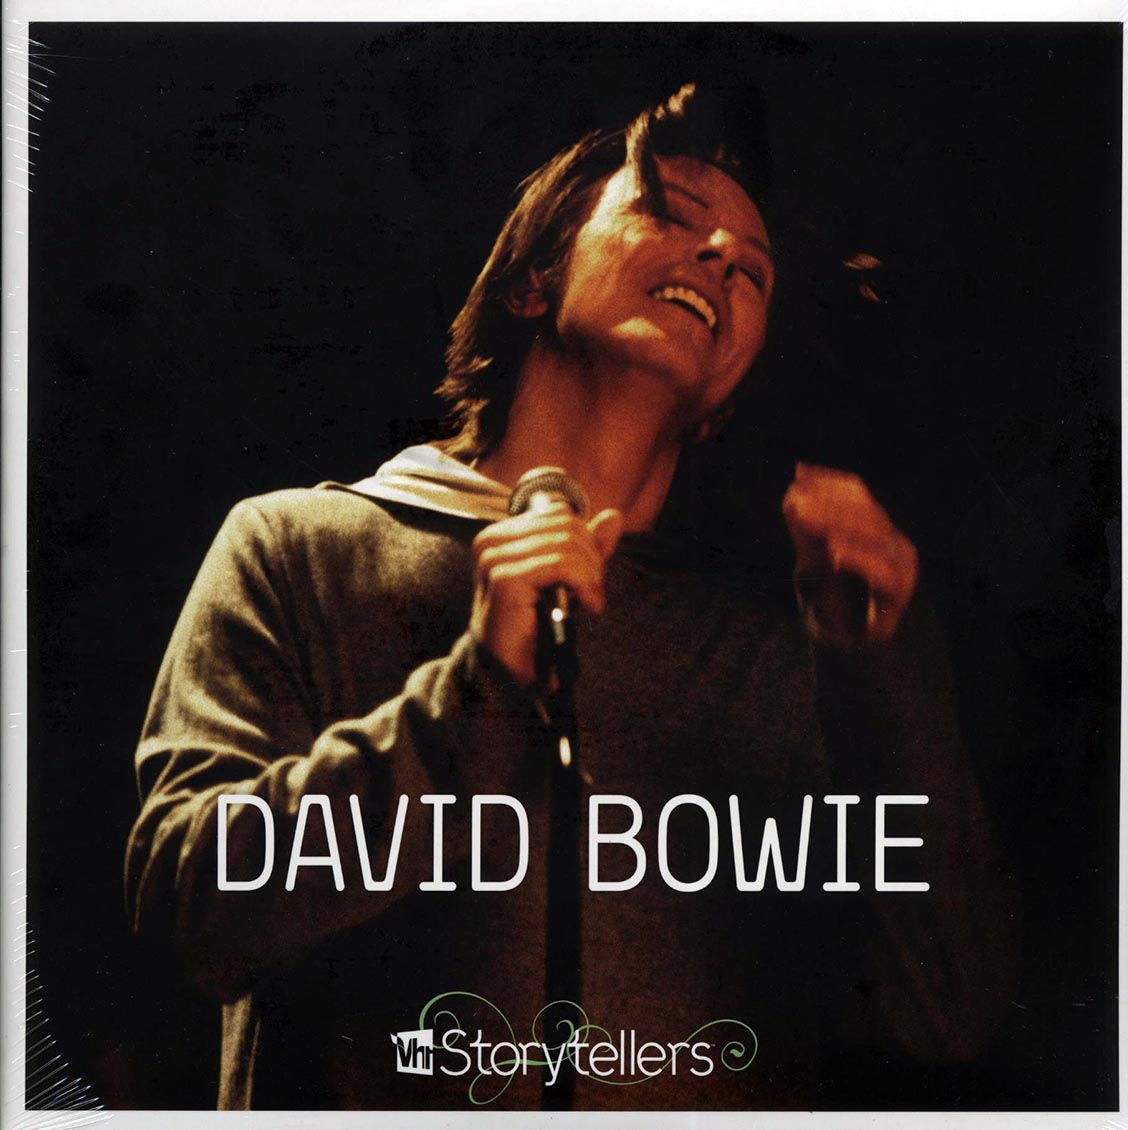 David Bowie - VH1 Storytellers [2019 Reissue Limited] [New Double VInyl Record]